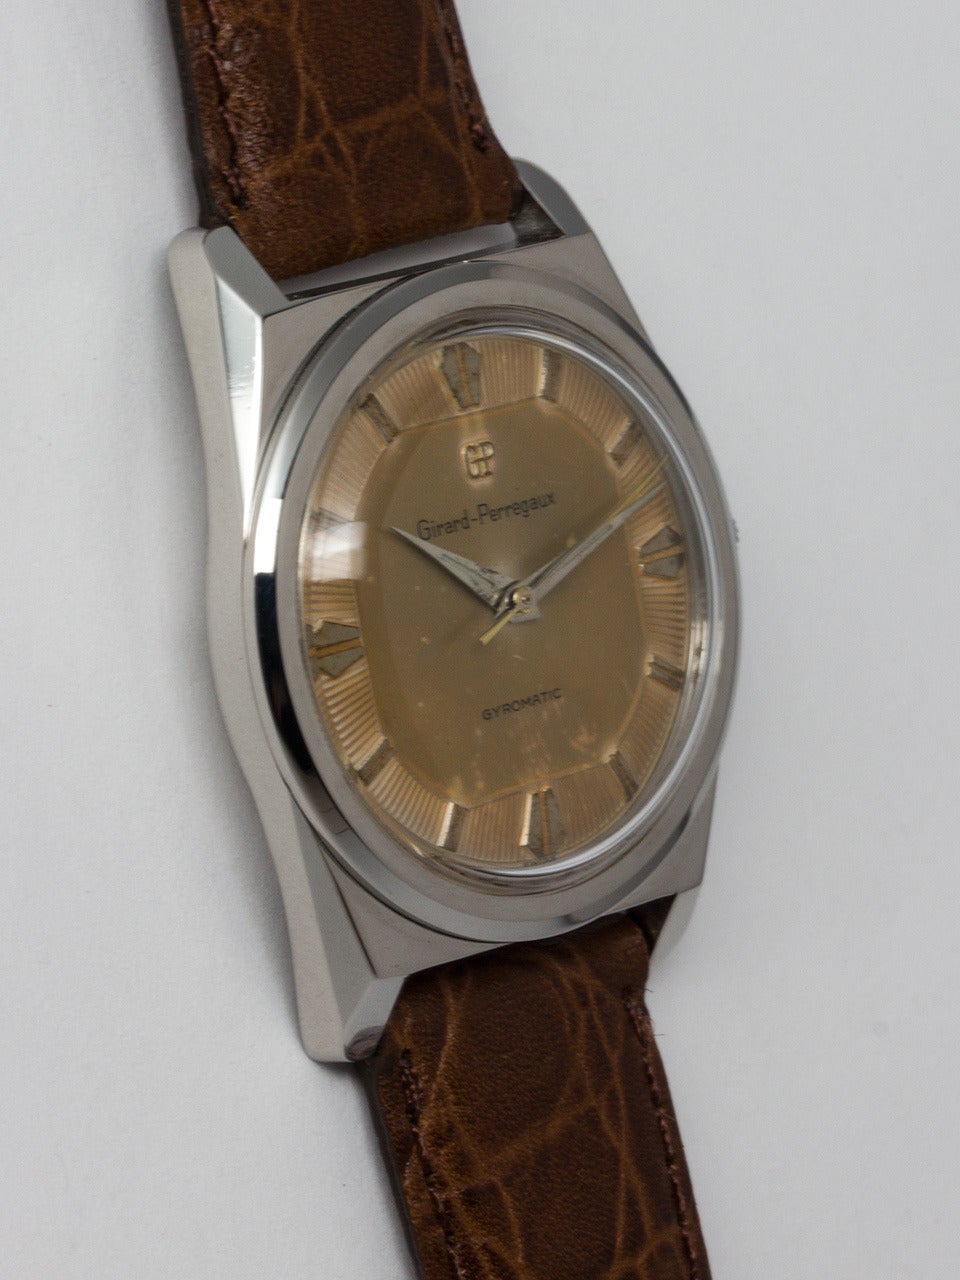 Girard Perregaux Stainless Steel Gyromatic Wristwatch circa 1960s. Unusual design 34 X 42mm faceted case with patina'd original dial with textured background and raised silver indexes and tapered sword hands. Powered by self winding caliber 21